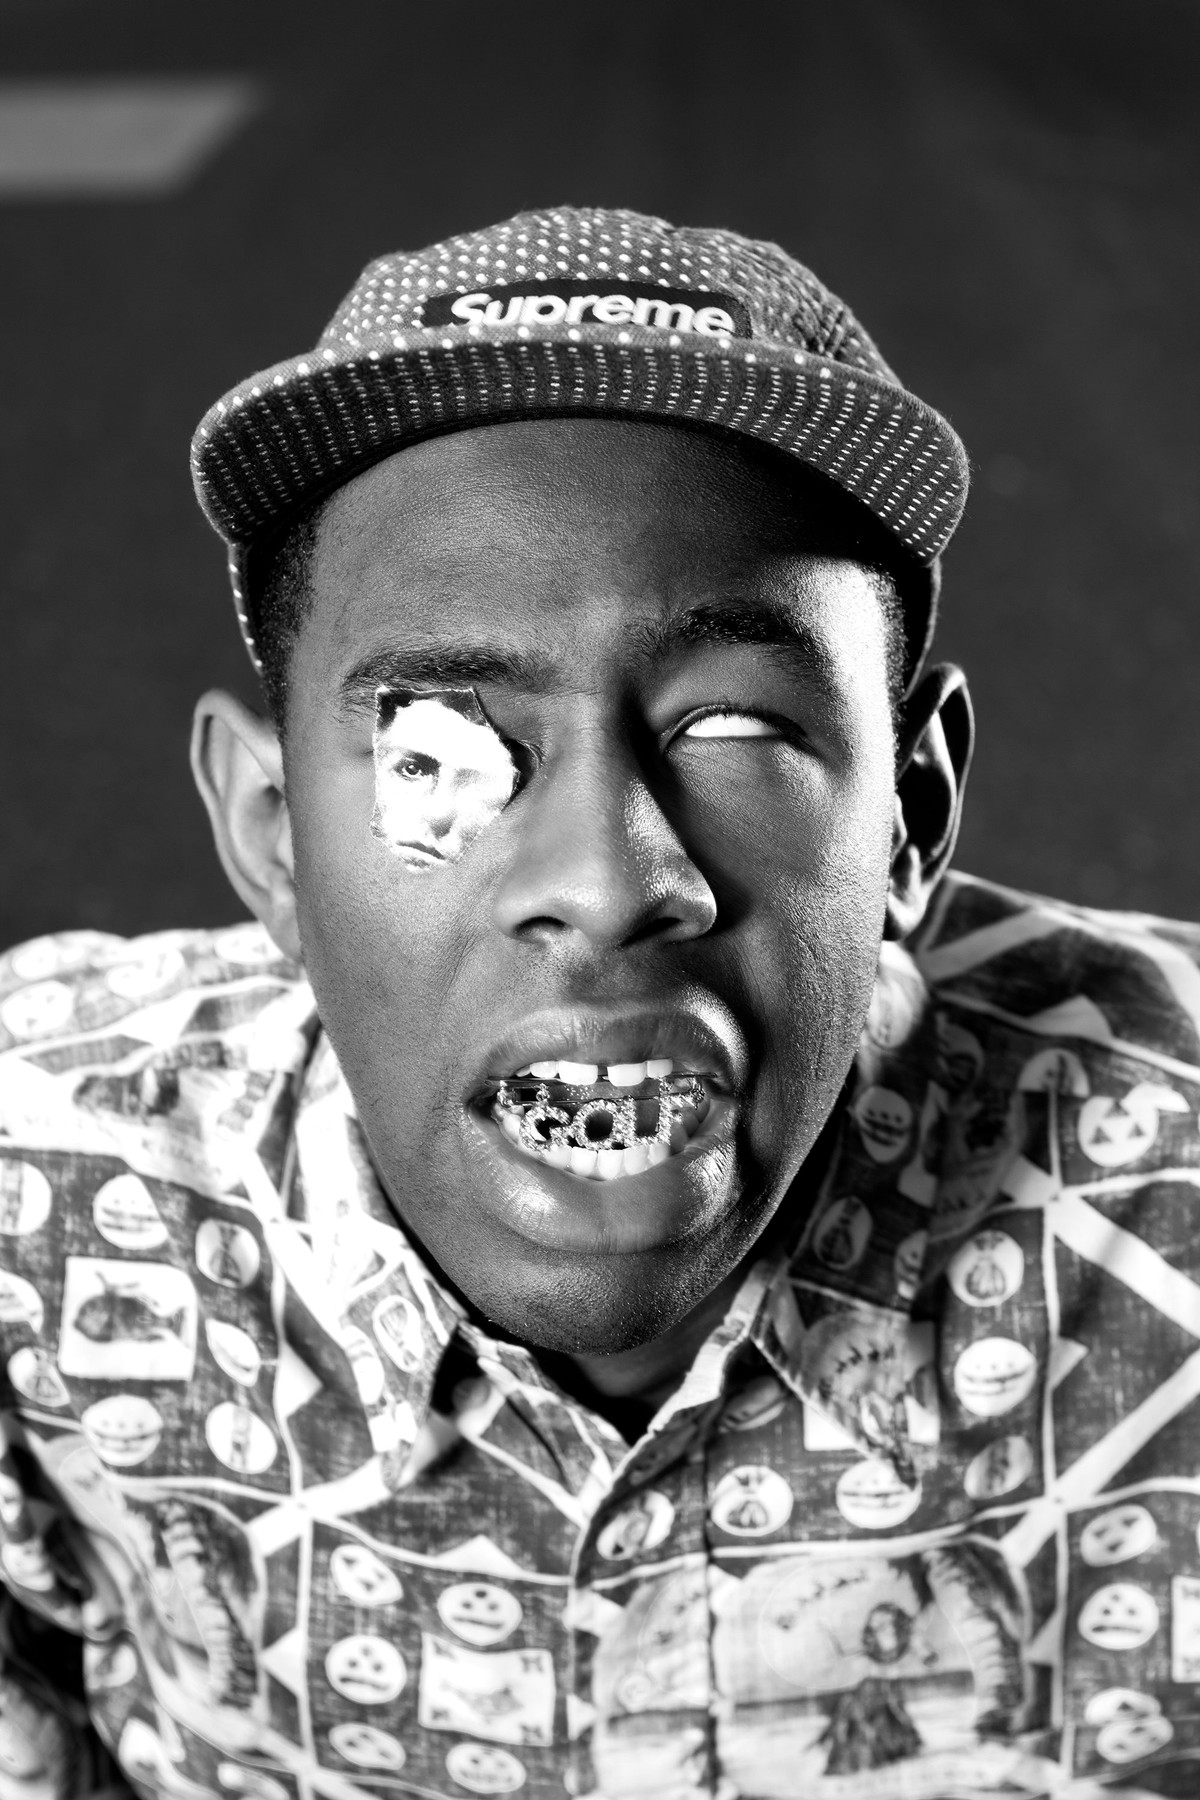 Interview with Tyler, The Creator: “I decided to stop my bullshit